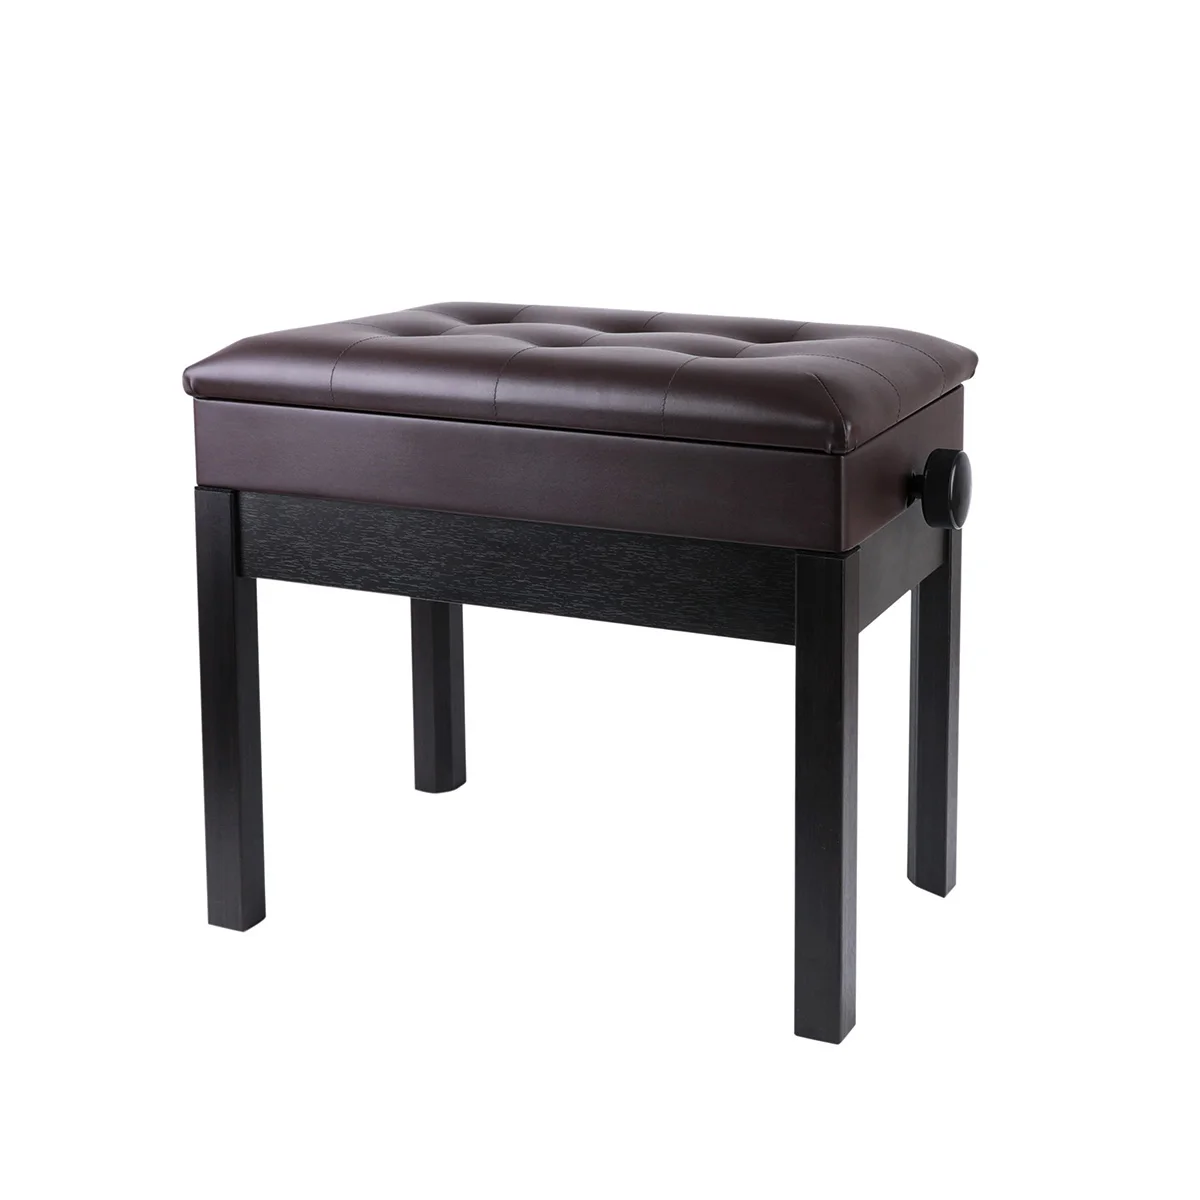 MU PU Leather Adjustable Piano Bench With Waterproof Cushion And Inner Solid Flip-Top Extra Music Storage Brown And Black 